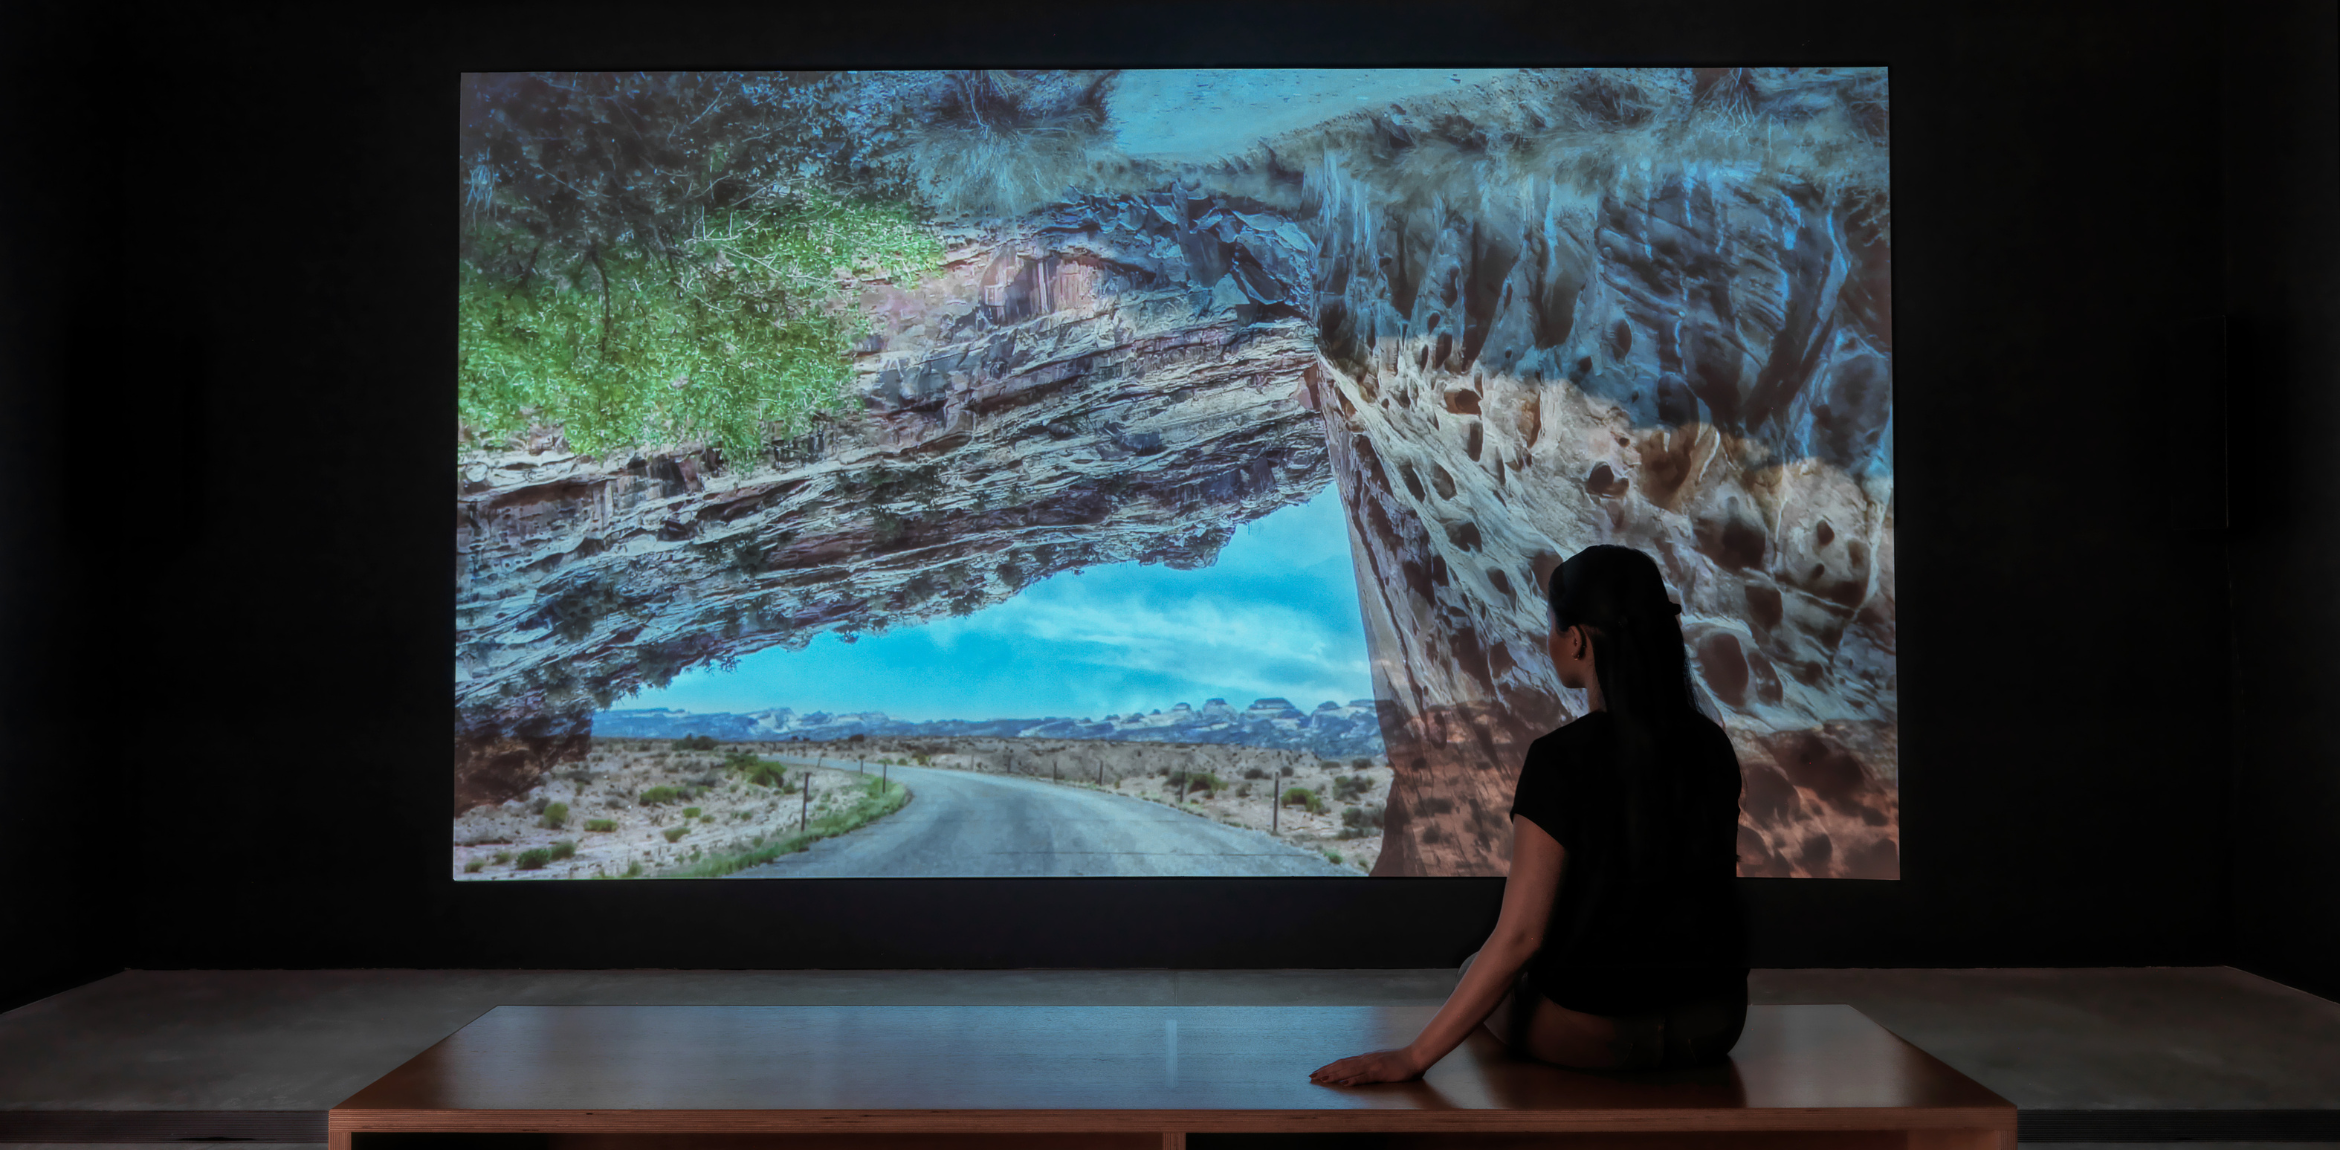  Female with dark hair and black blouse watching a film of two landscapes composited on top of each other